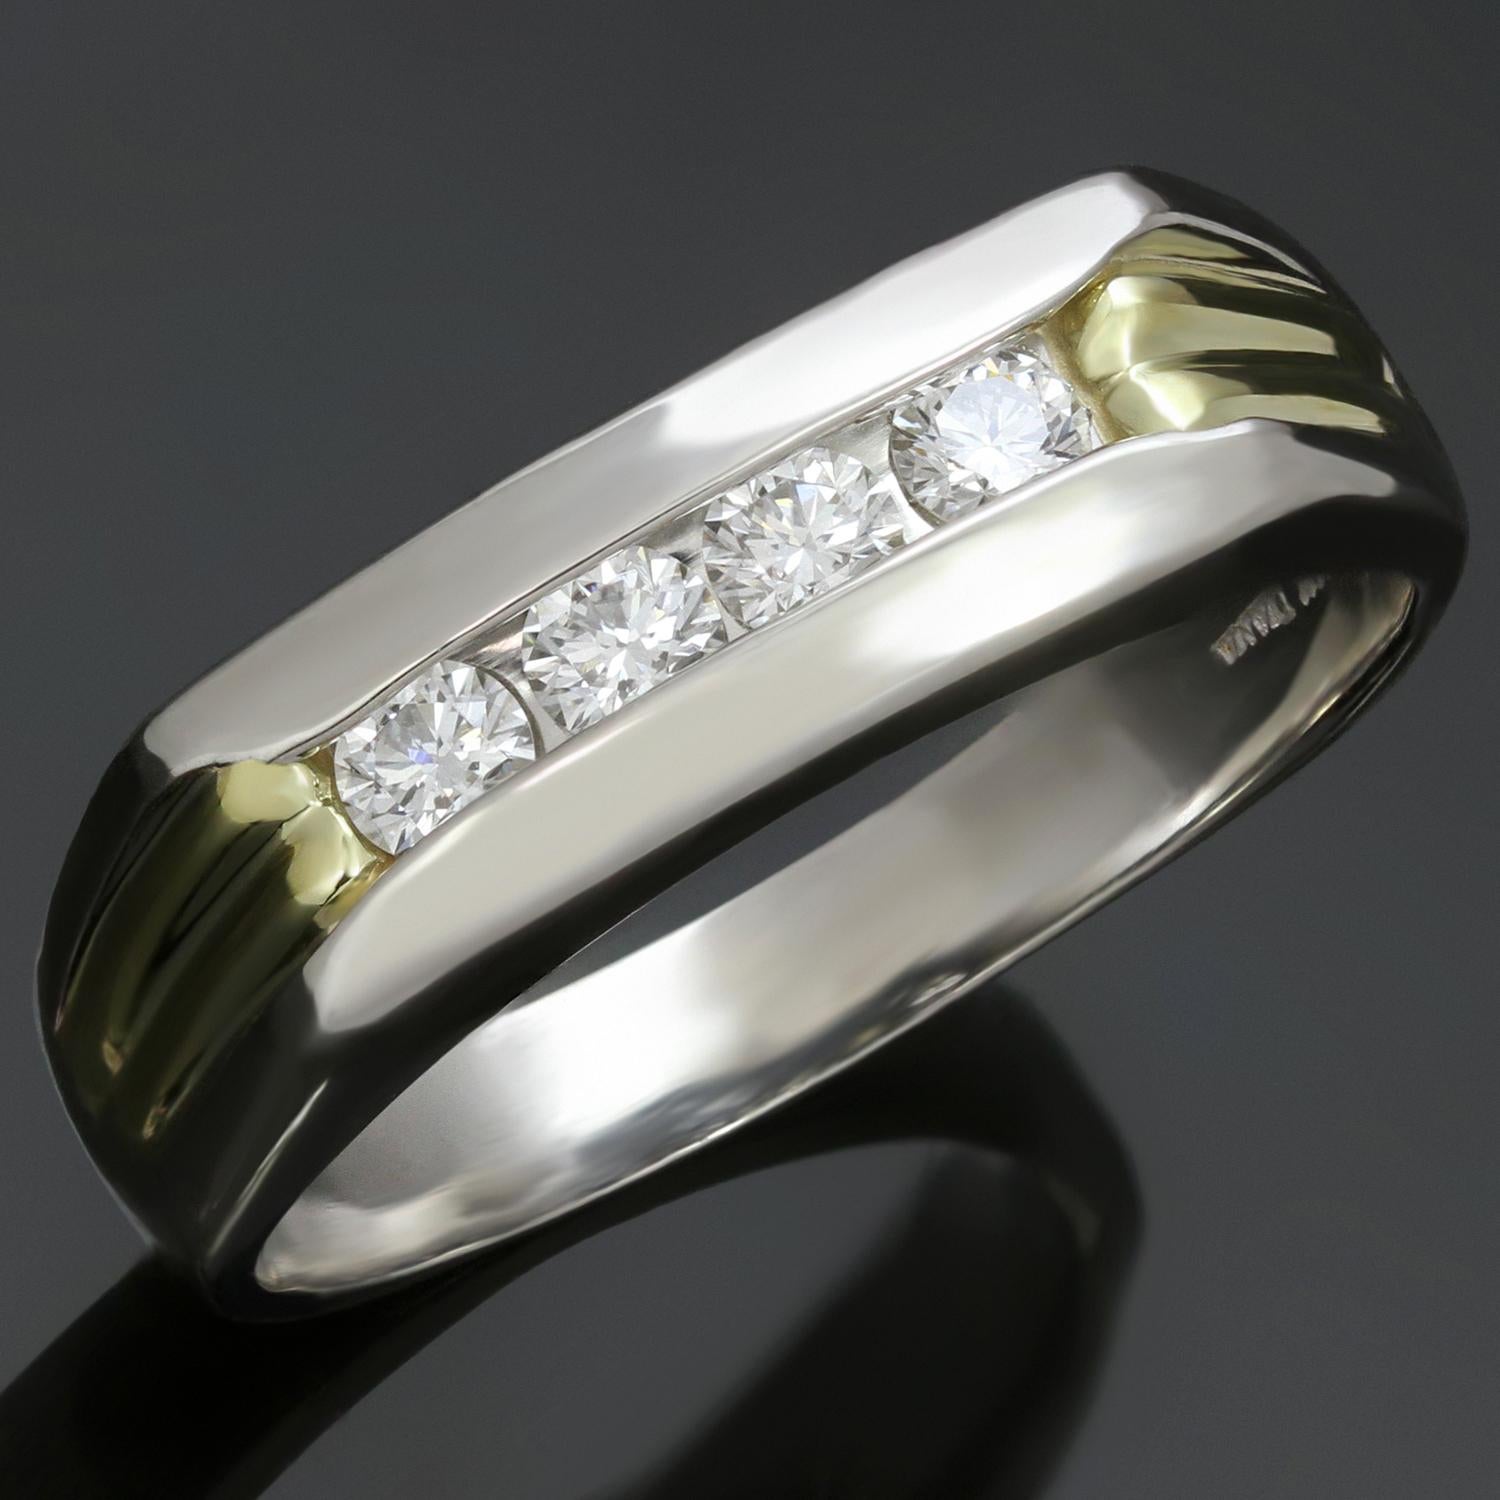 This classic contemporary men's band ring is crafted in platinum with 18k yellow gold accents and set with brilliant-cut round diamonds. Made in United States circa 2010s. Measurements: 0.27